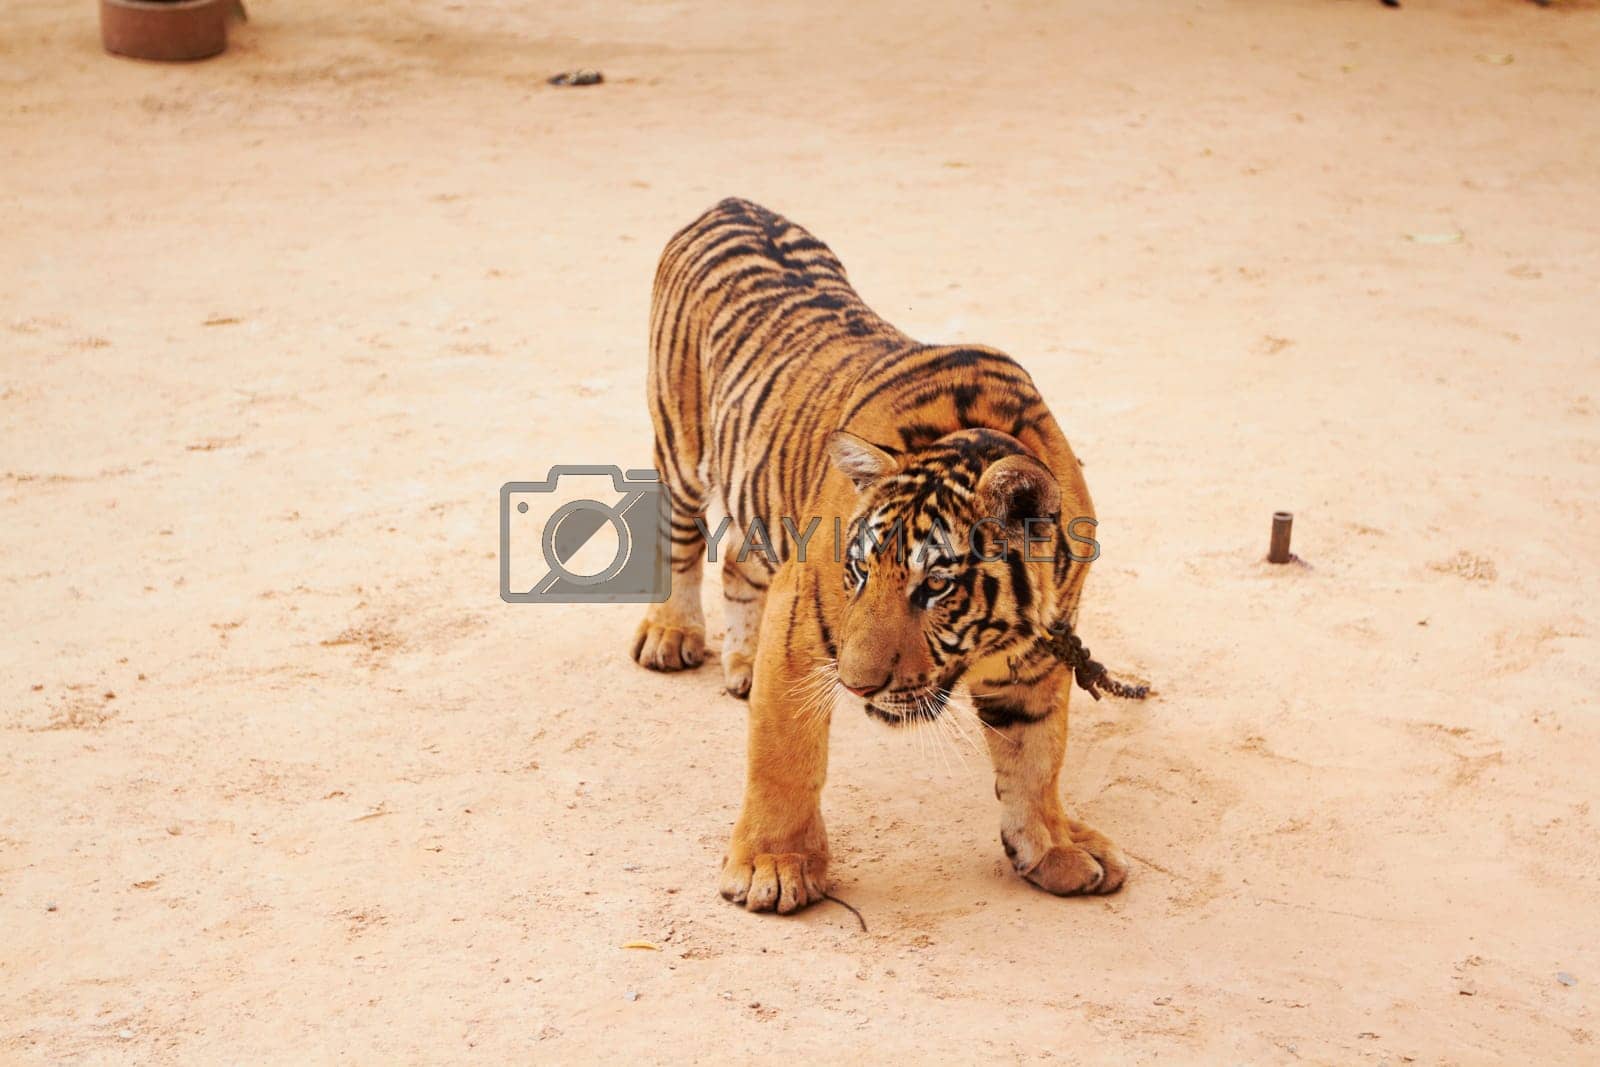 Royalty free image of Zoo, wildlife and tiger in the sand by a circus for majestic entertainment or safari. Animal, feline and an exotic big cat walking in a desert or dune in an outdoor conservation or habitat in India. by YuriArcurs